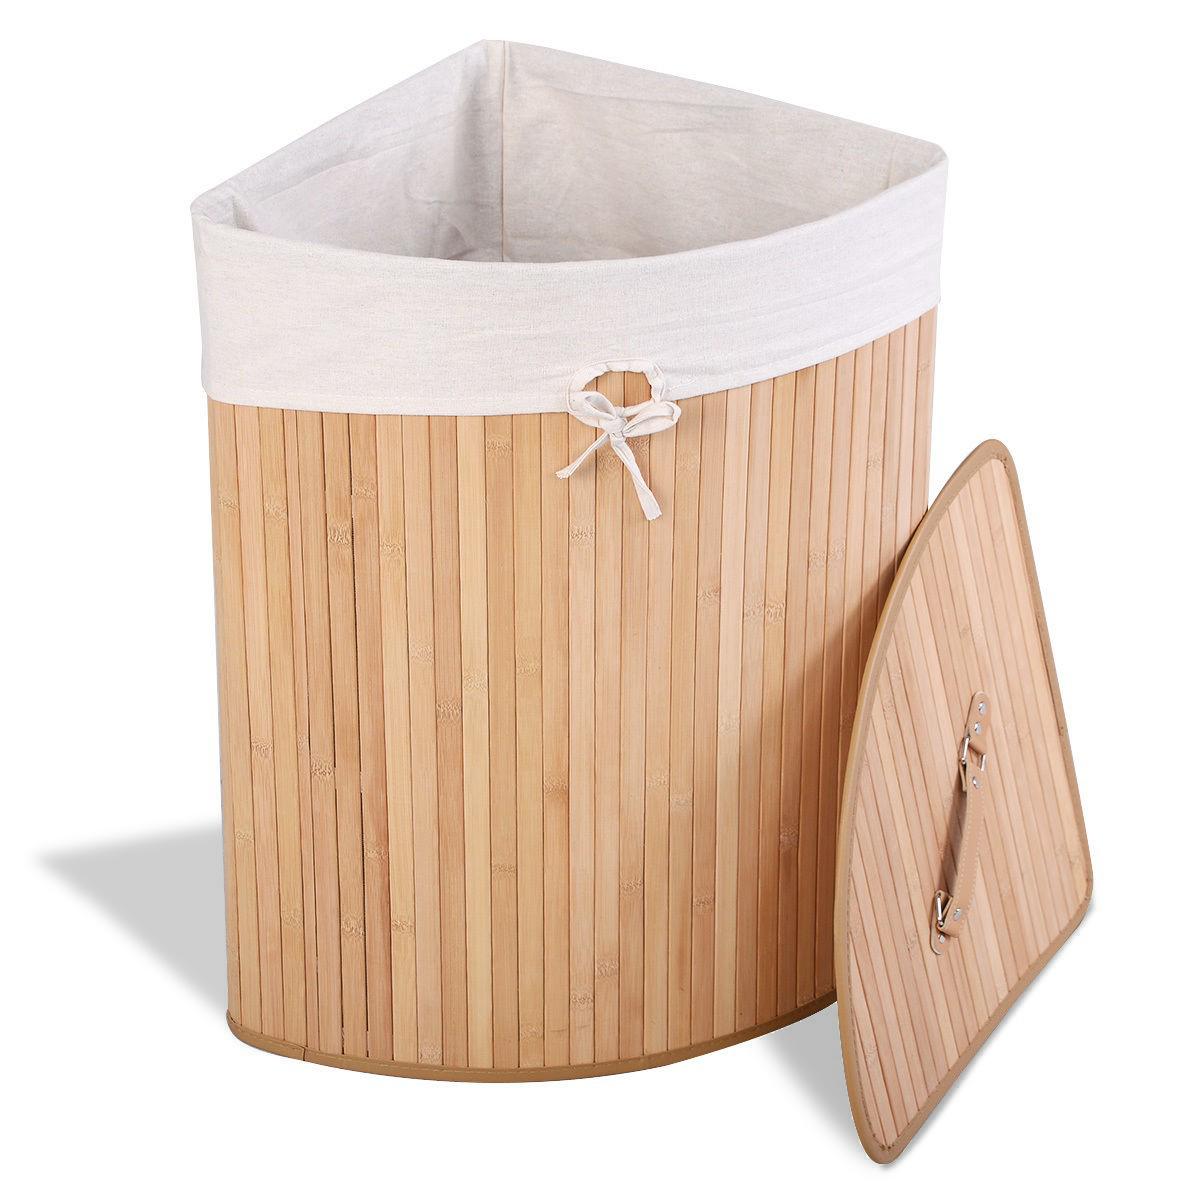 Corner Bamboo Hamper Laundry Basket - Direct by Wilsons Home Store